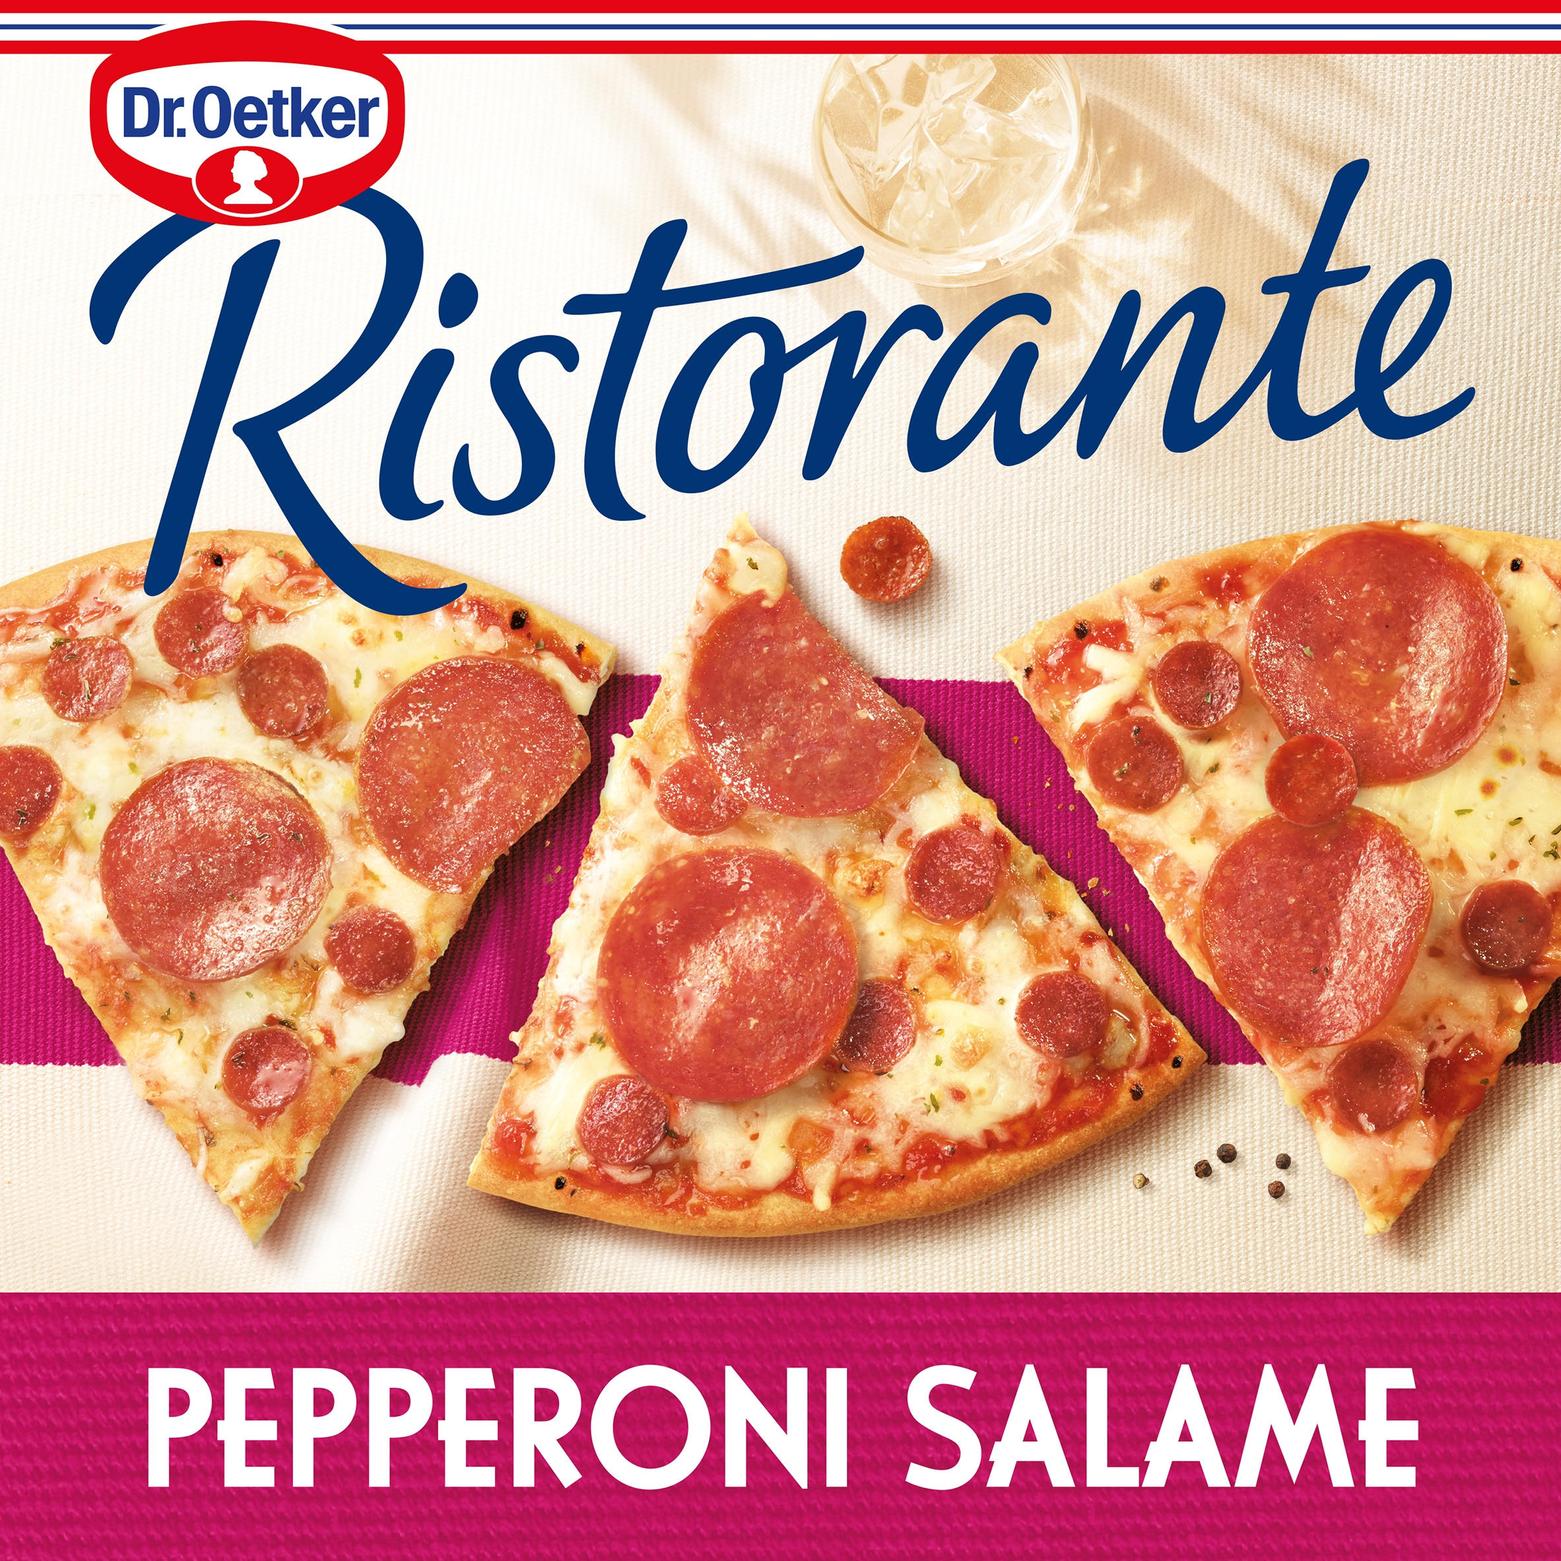 Dr. Oetker Ristorante Pepperoni Salame Pizza offers at £3 in Iceland